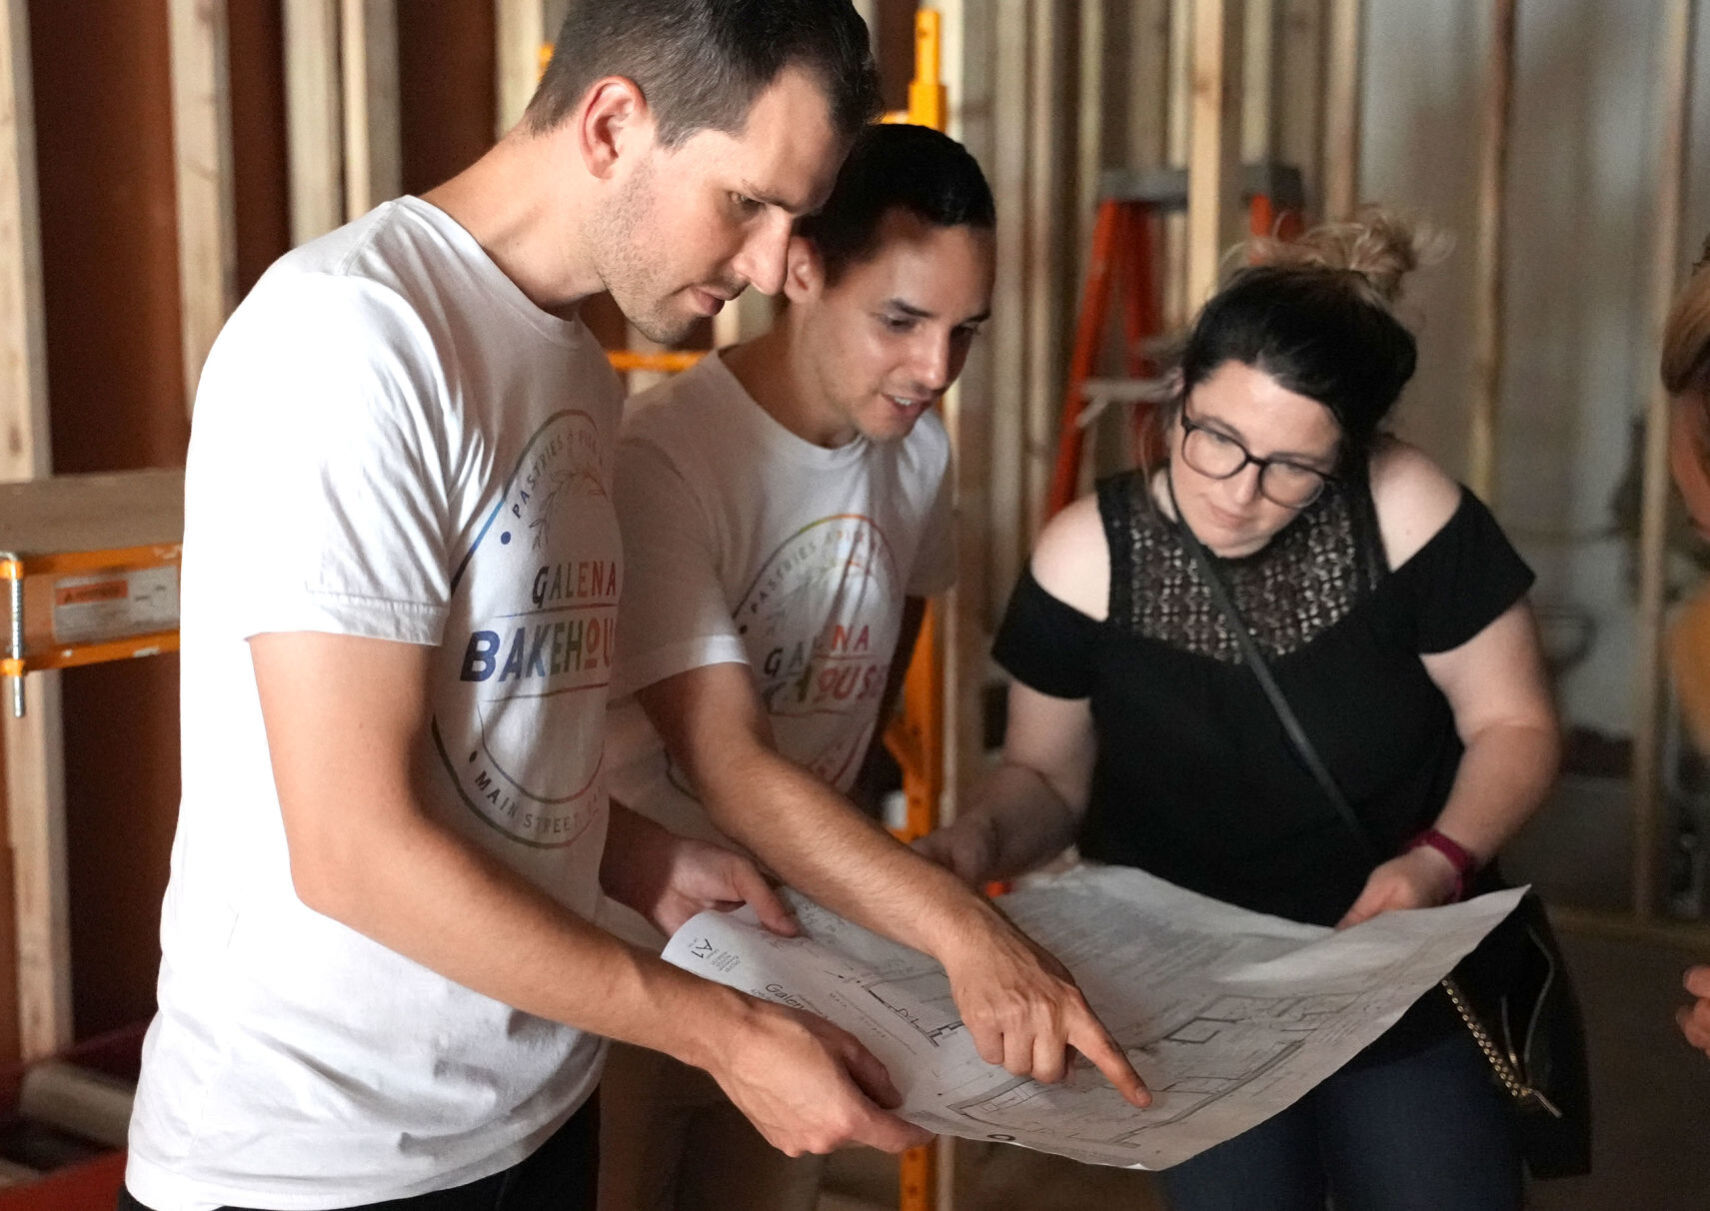 (From left) Geoff Karnish and Alex Arroyo, co-owners of the Galena Bakehouse, stand next to Marisa Arroyo, of Cleveland, Ohio, while showing off building plans during a tour of the interior of the building at 421 S. Main St. in Galena, Ill. They plan to be open for business in early August. Photo taken on Saturday, June 19, 2021.    PHOTO CREDIT: PAUL KURUTSIDES